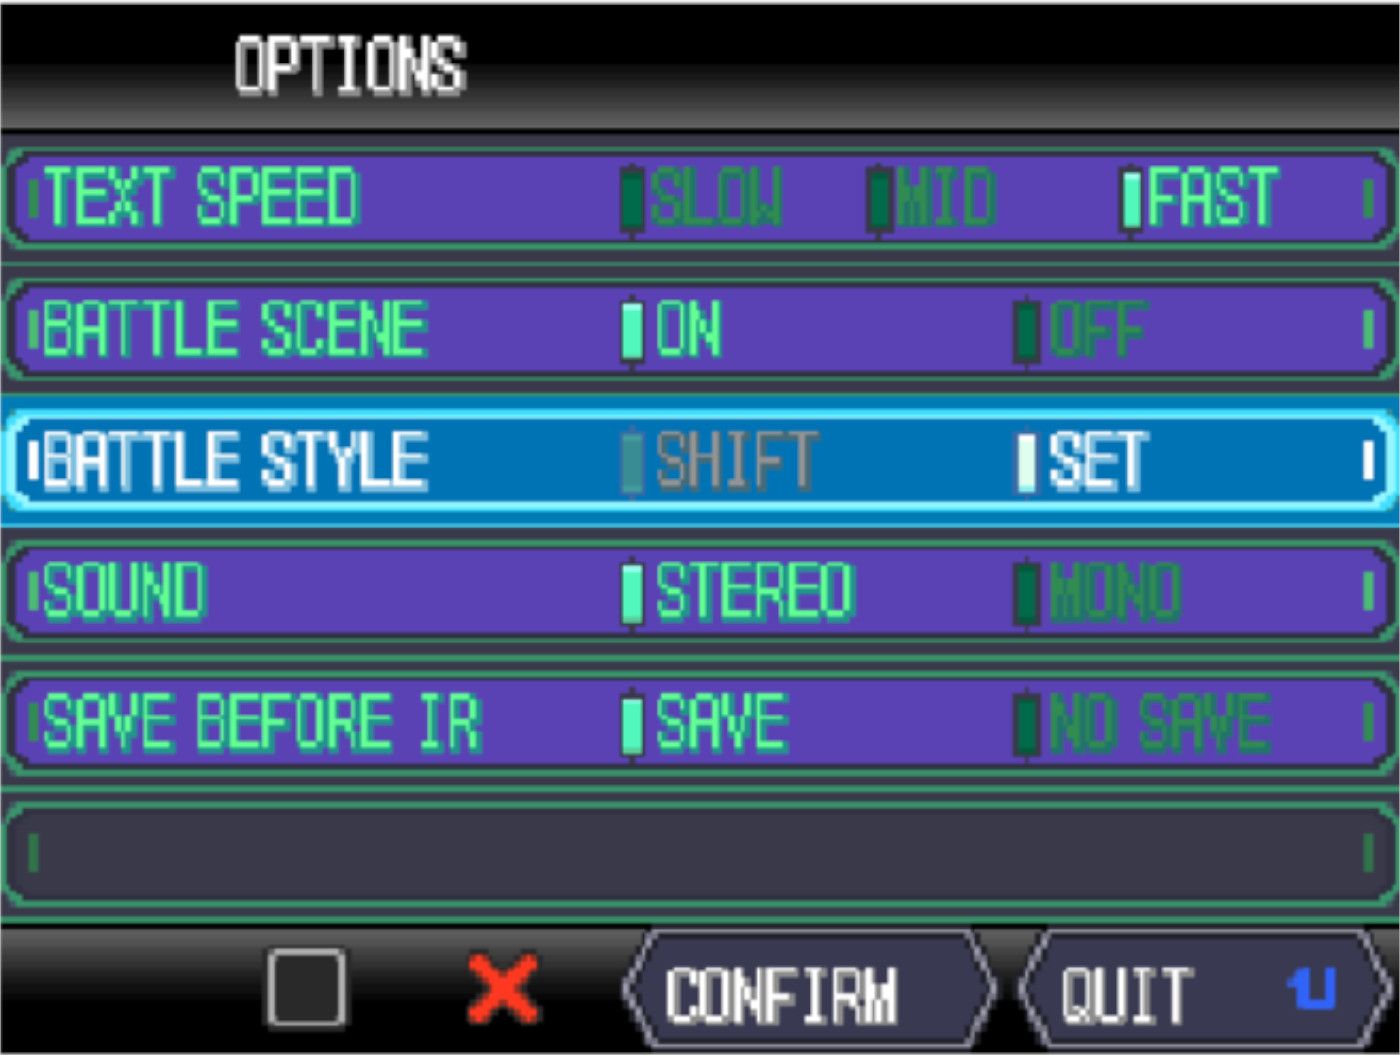 the options meni of pokemon black with the battle style highlighted and changed to set